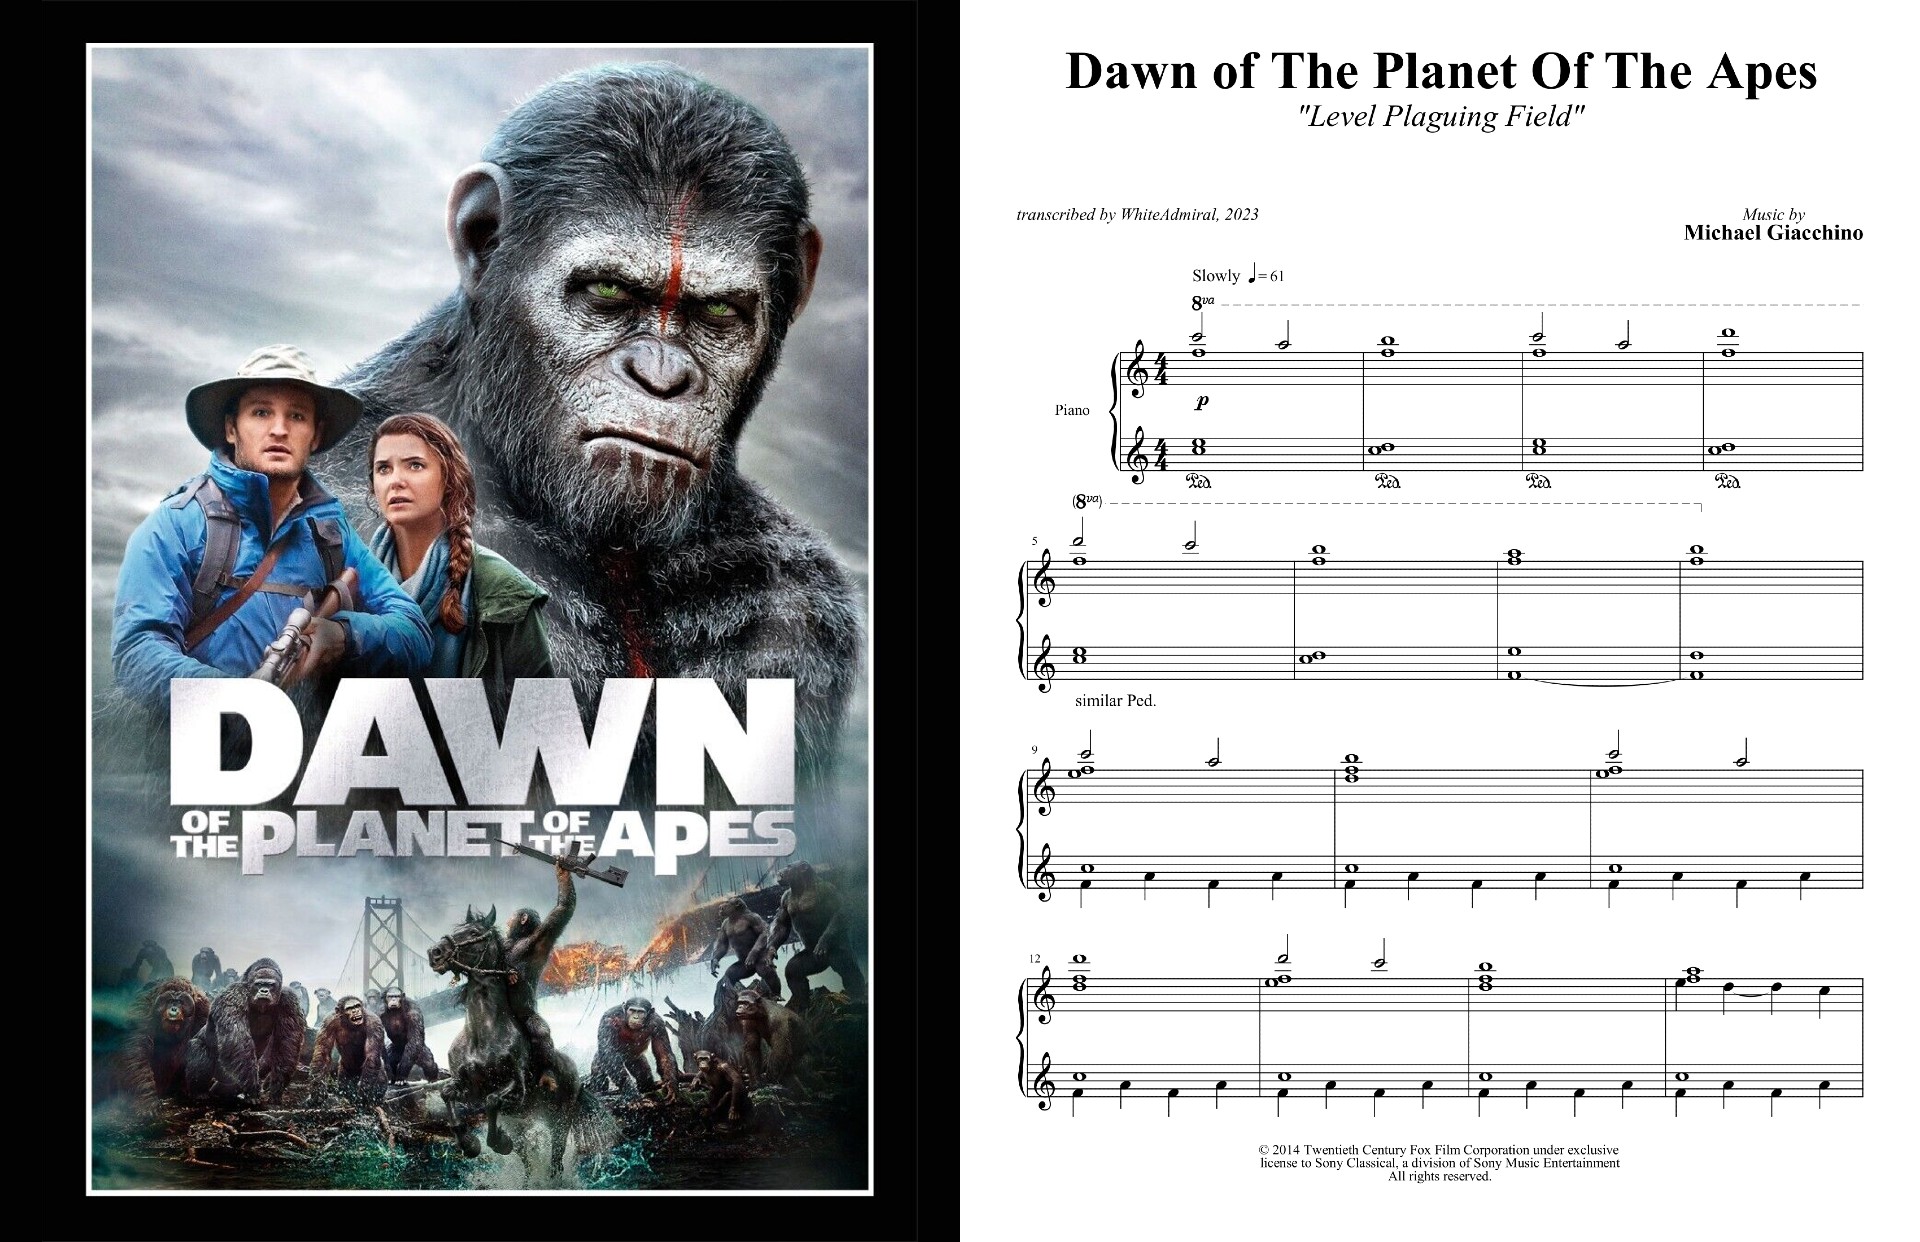 DAWN OF THE PLANET OF THE APES - Level Plaguing Field.jpg